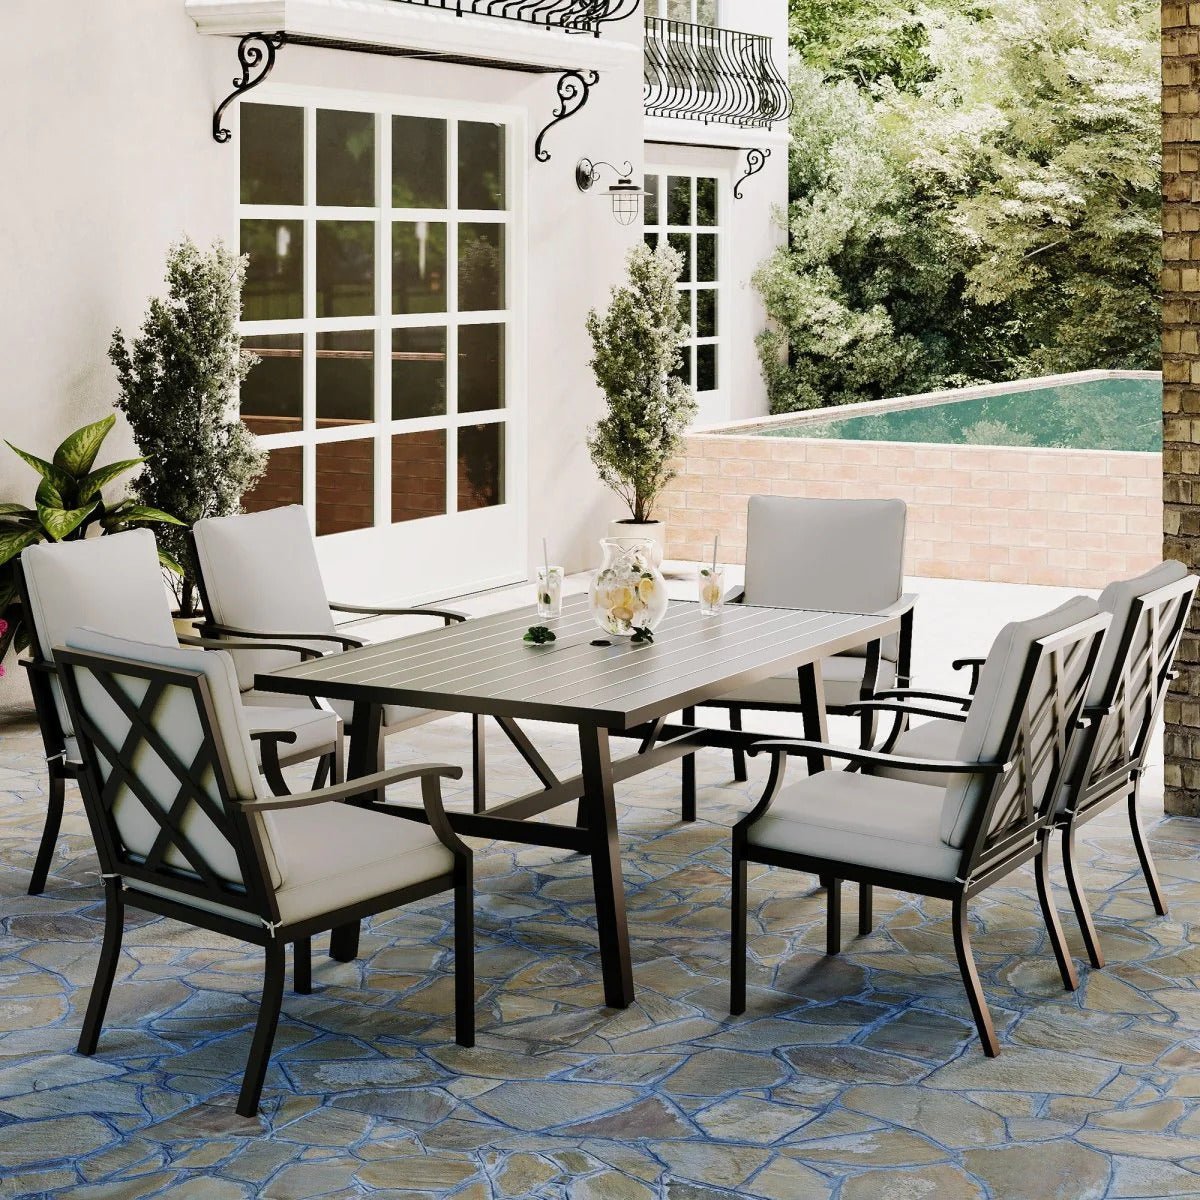 Outdoor Dining Sets - Alpine Outlets